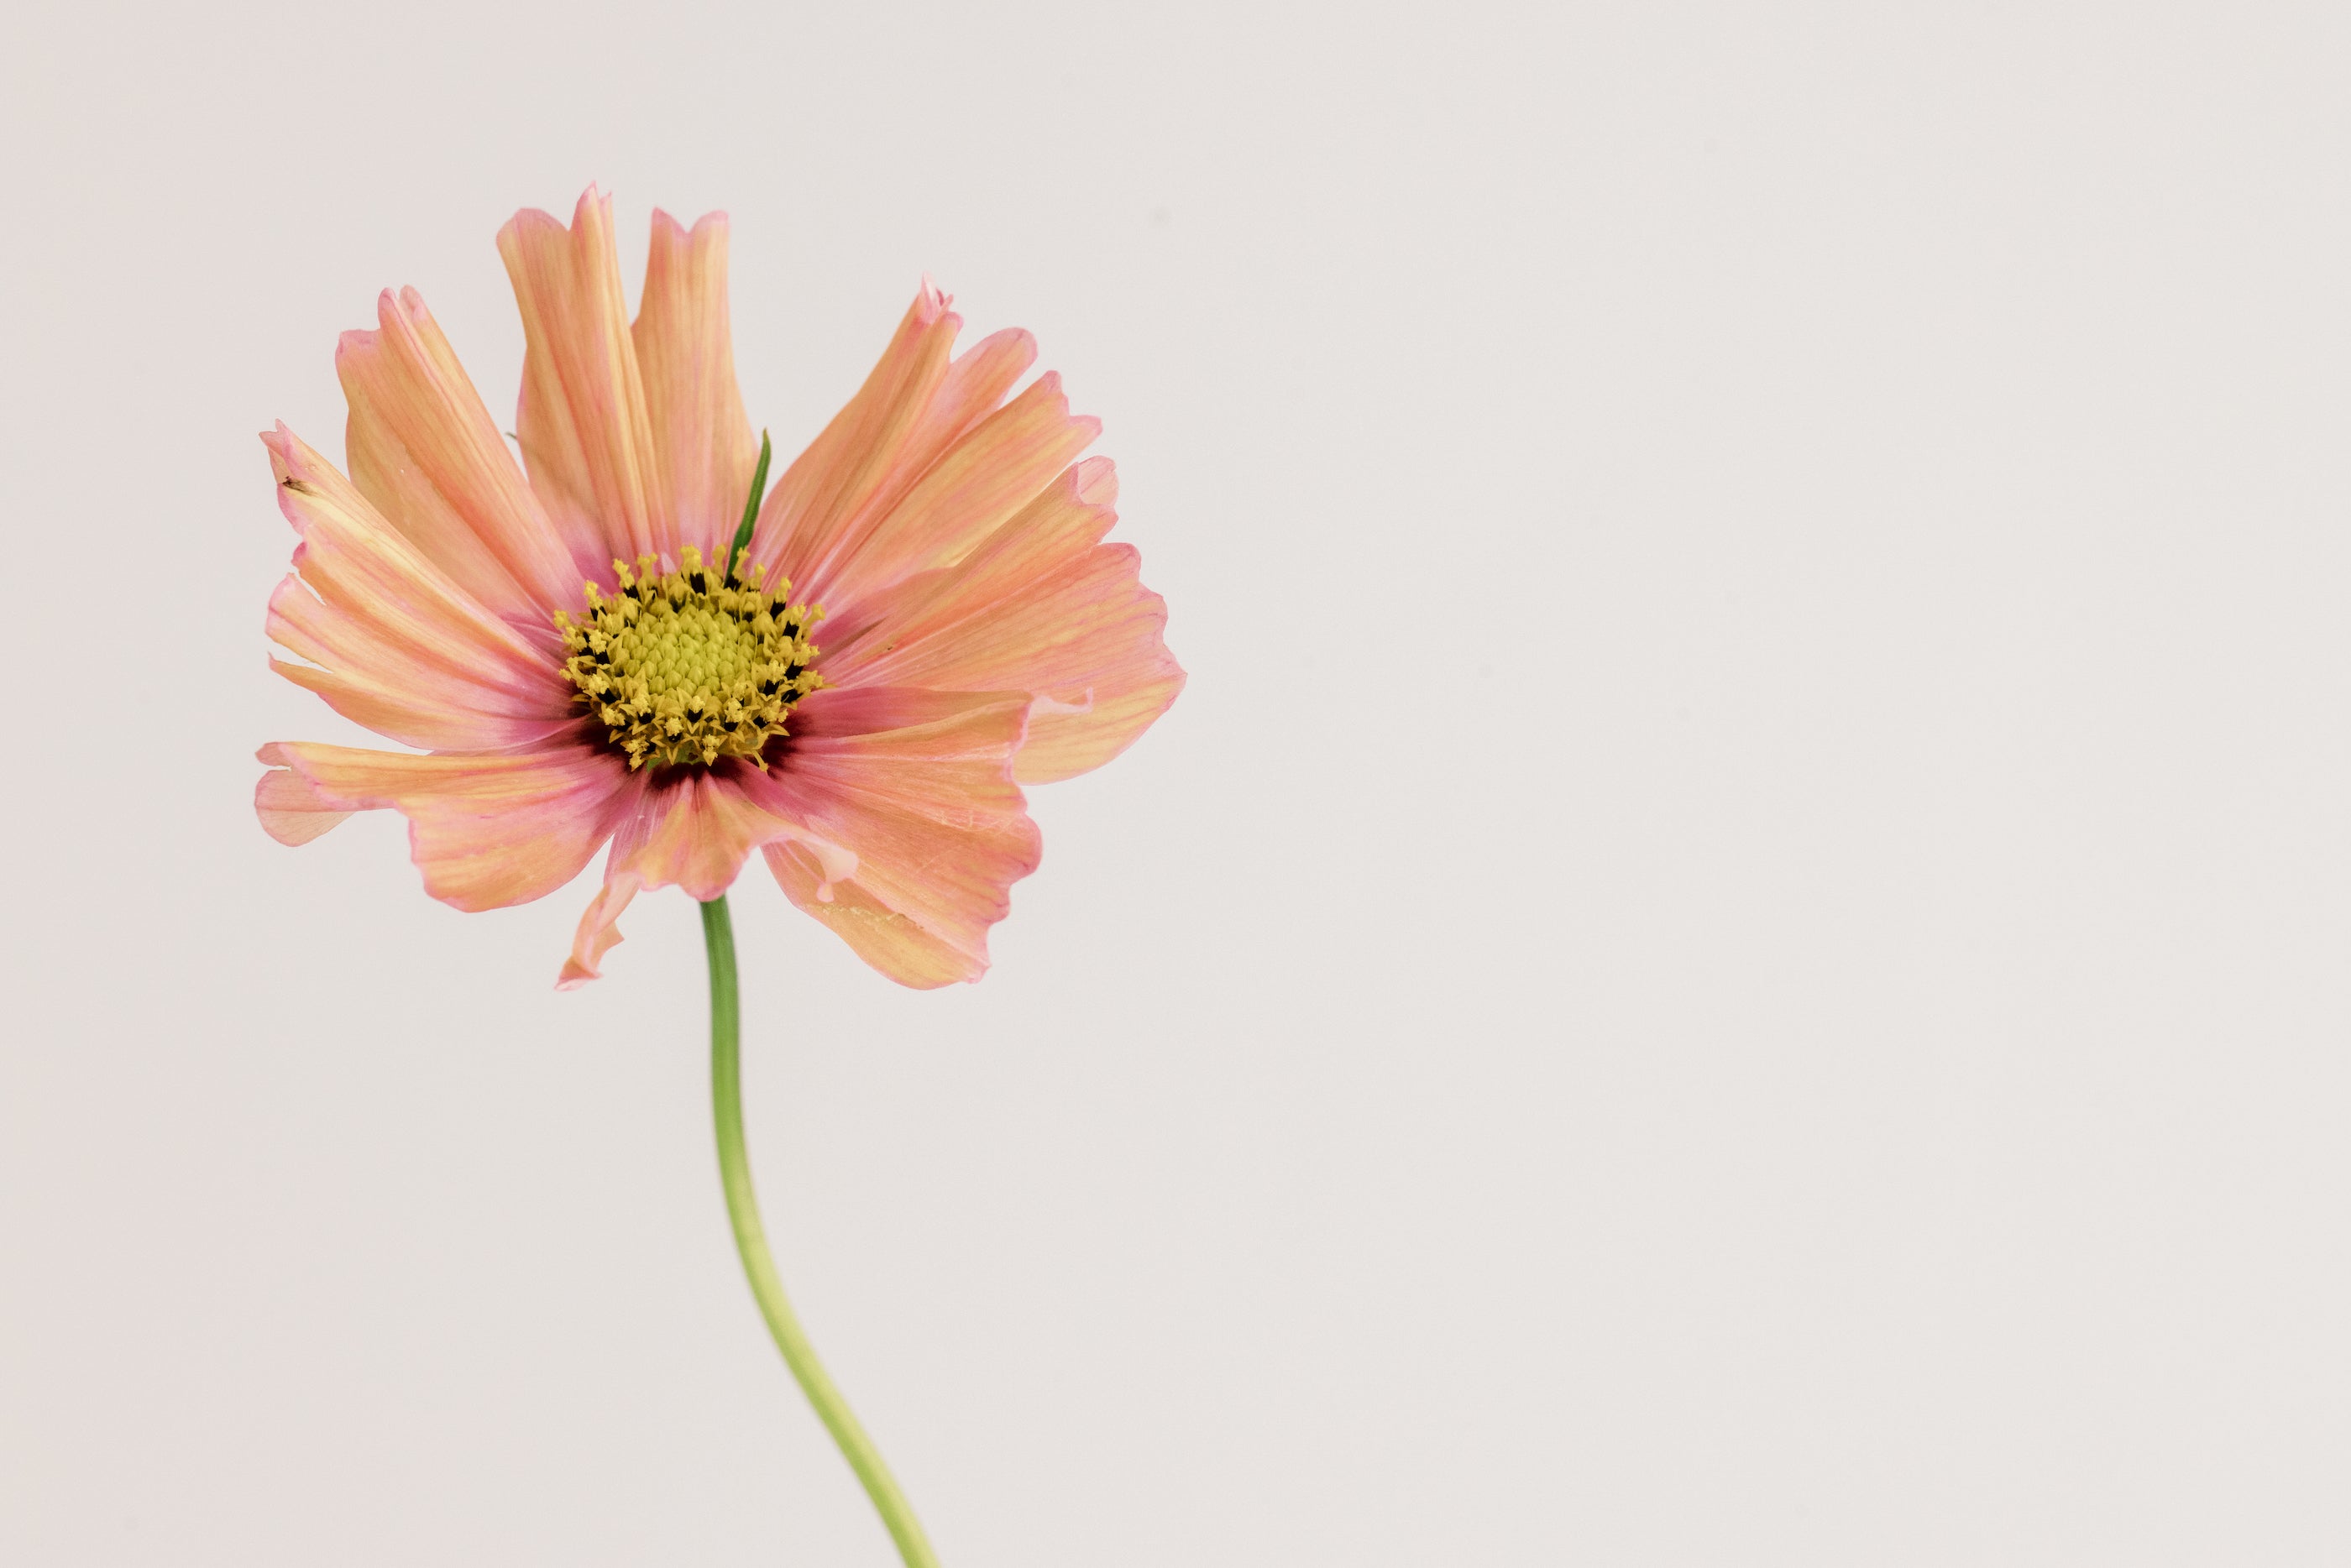 A vibrant coral pink daisy with delicate petals and a prominent yellow center, perched on a curving green stem against a soft beige background